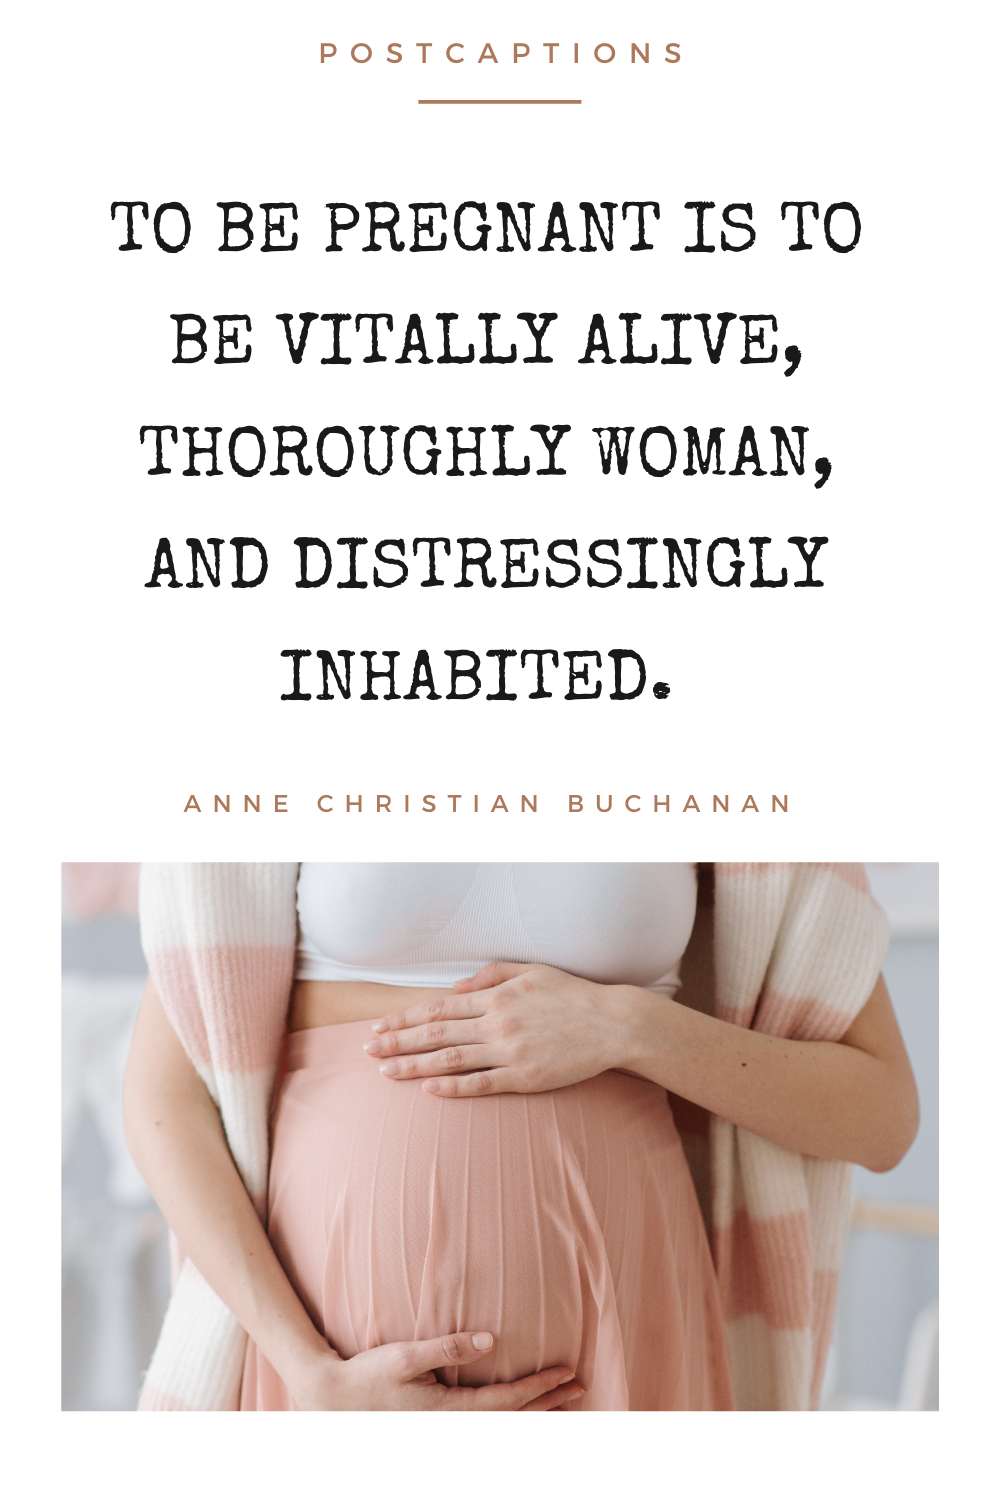 Pregnancy quotes for Instagram post